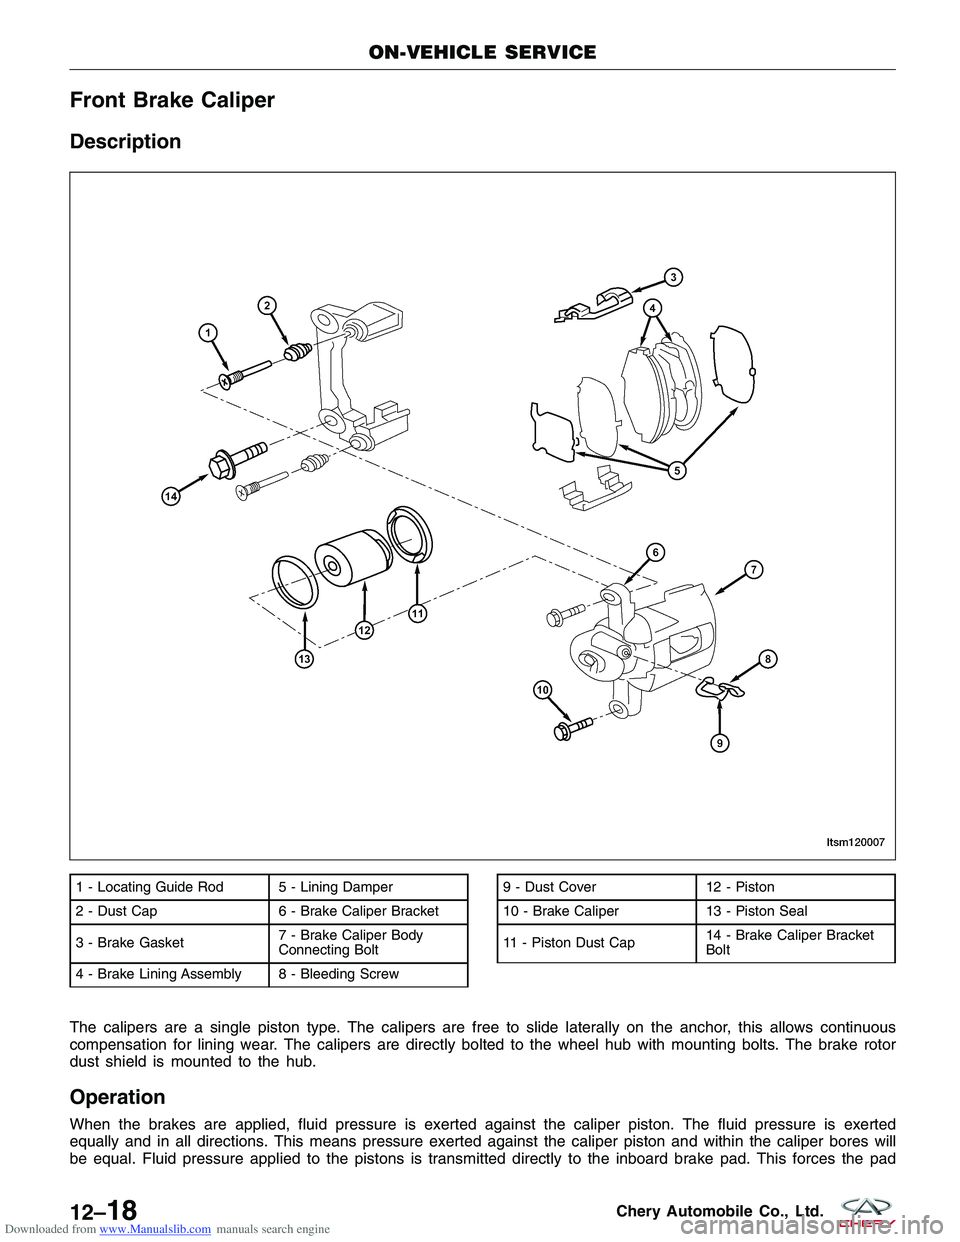 CHERY TIGGO 2009  Service Repair Manual Downloaded from www.Manualslib.com manuals search engine Front Brake Caliper
Description
The calipers are a single piston type. The calipers are free to slide laterally on the anchor, this allows cont